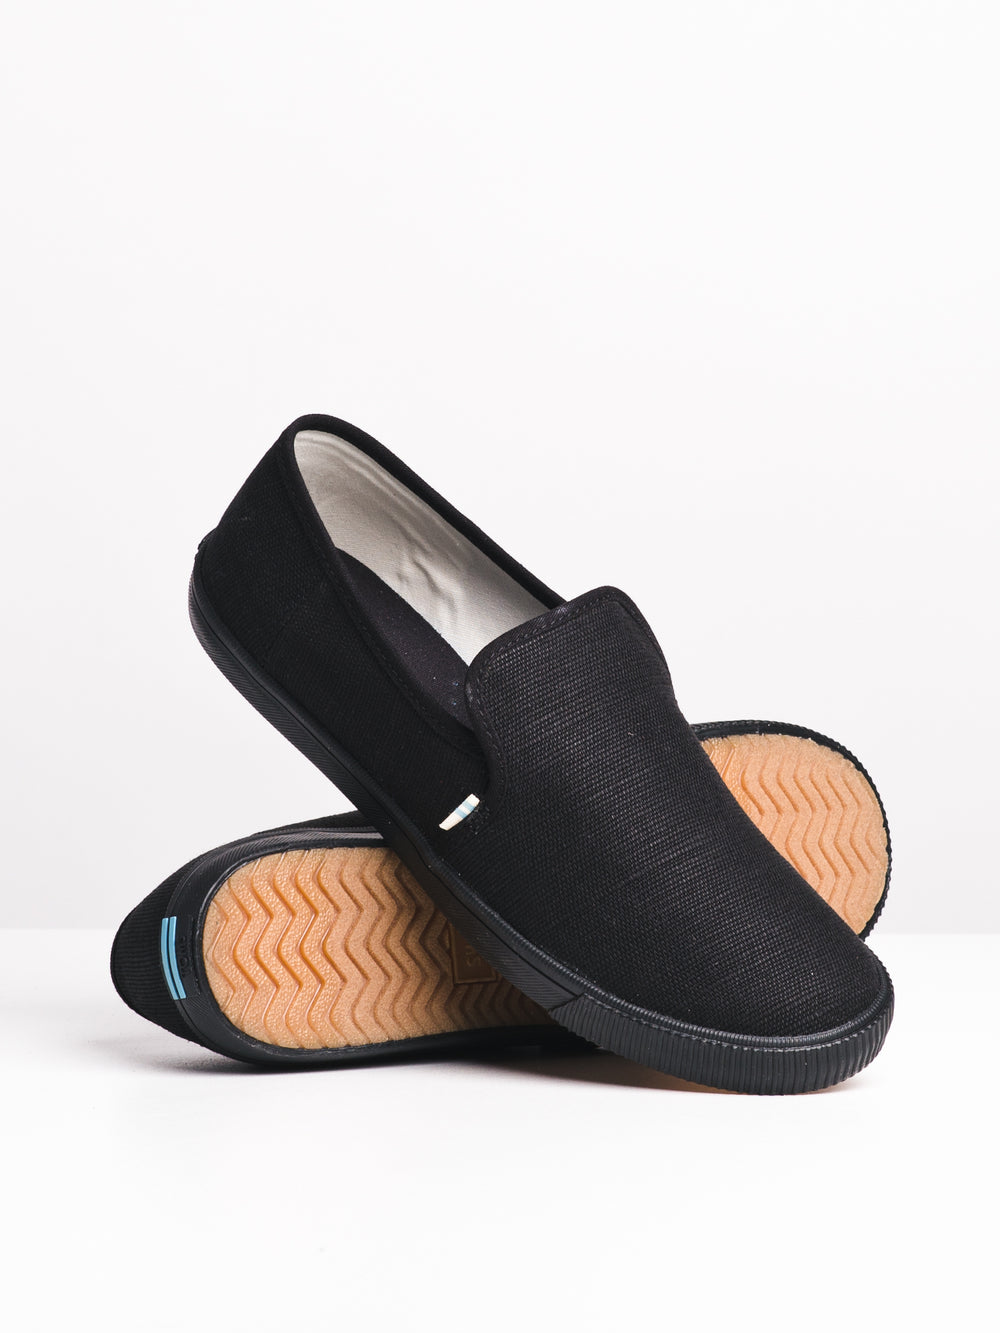 WOMENS CLEMENTE - BLACK CNVS - CLEARANCE